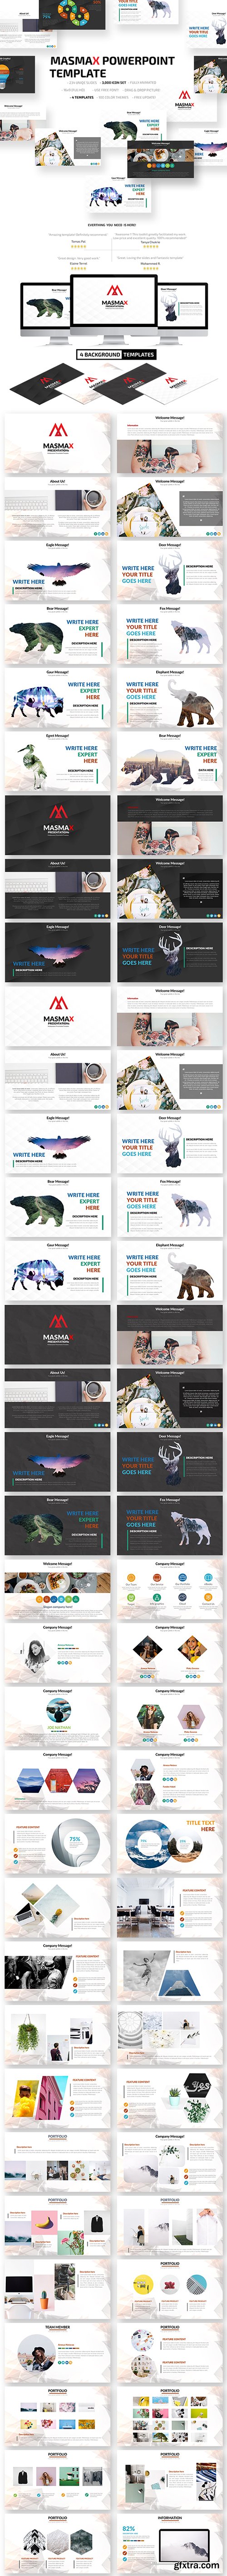 Graphicriver - Masmax Powerpoint Template 21605699